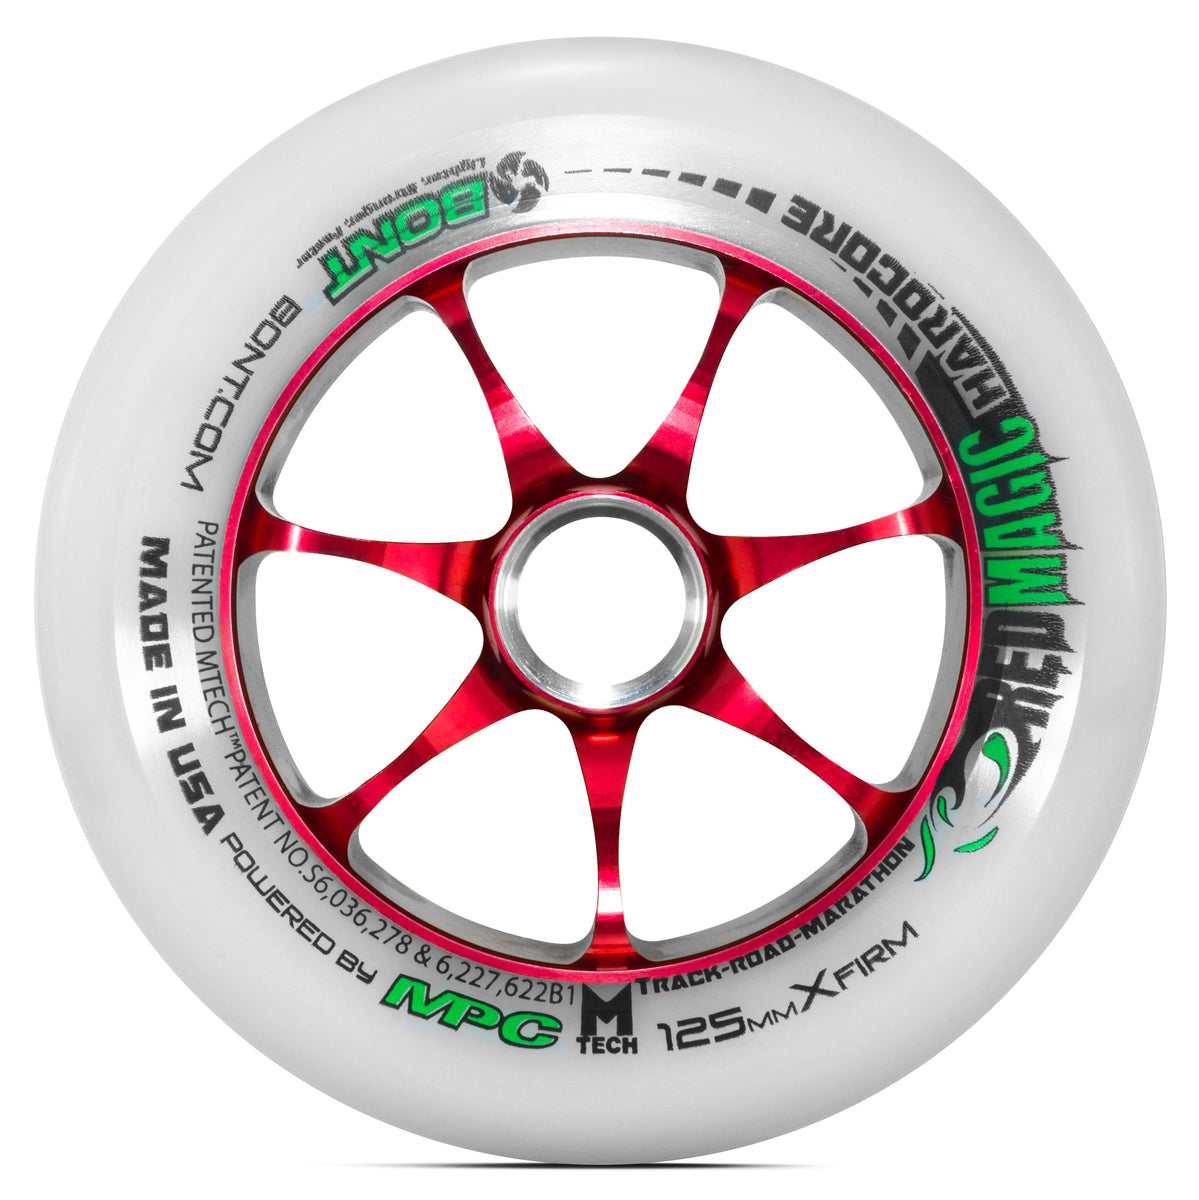 INLINE, QUAD AND ROLLER DERBY WHEELS